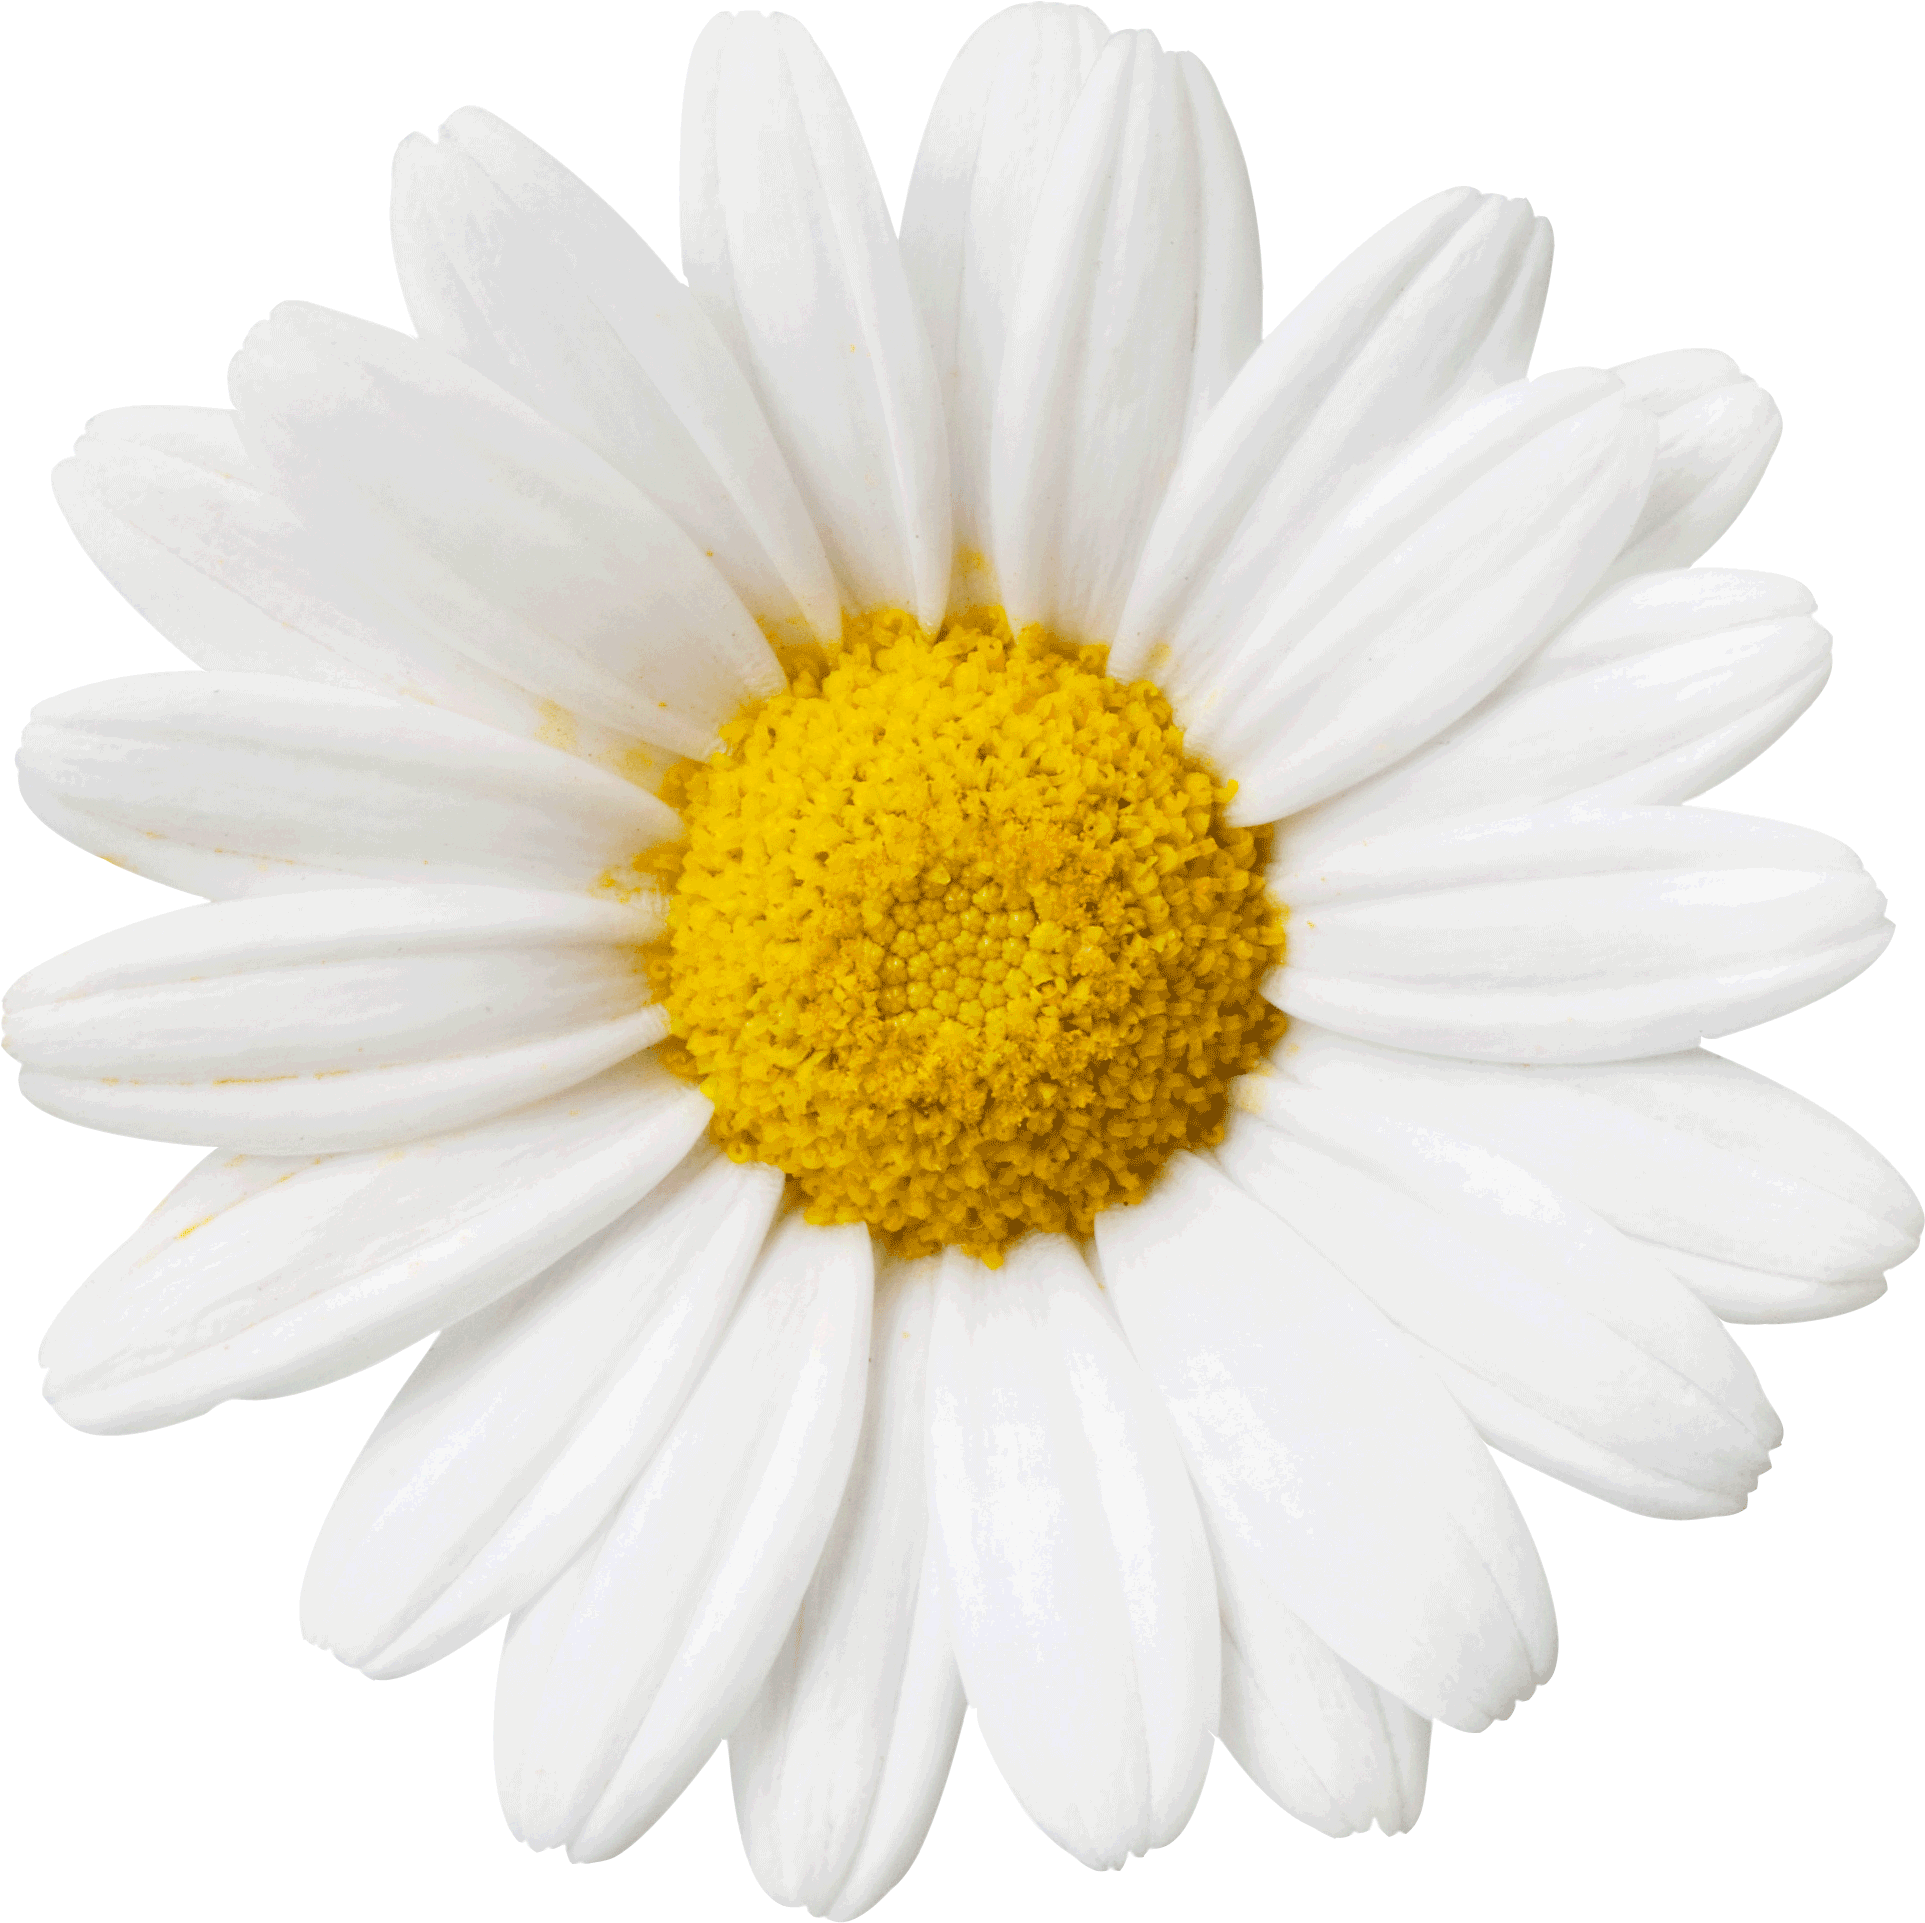 Flower Daisy Sticker By Lime Crime - Transparent Daisy Gif - Free